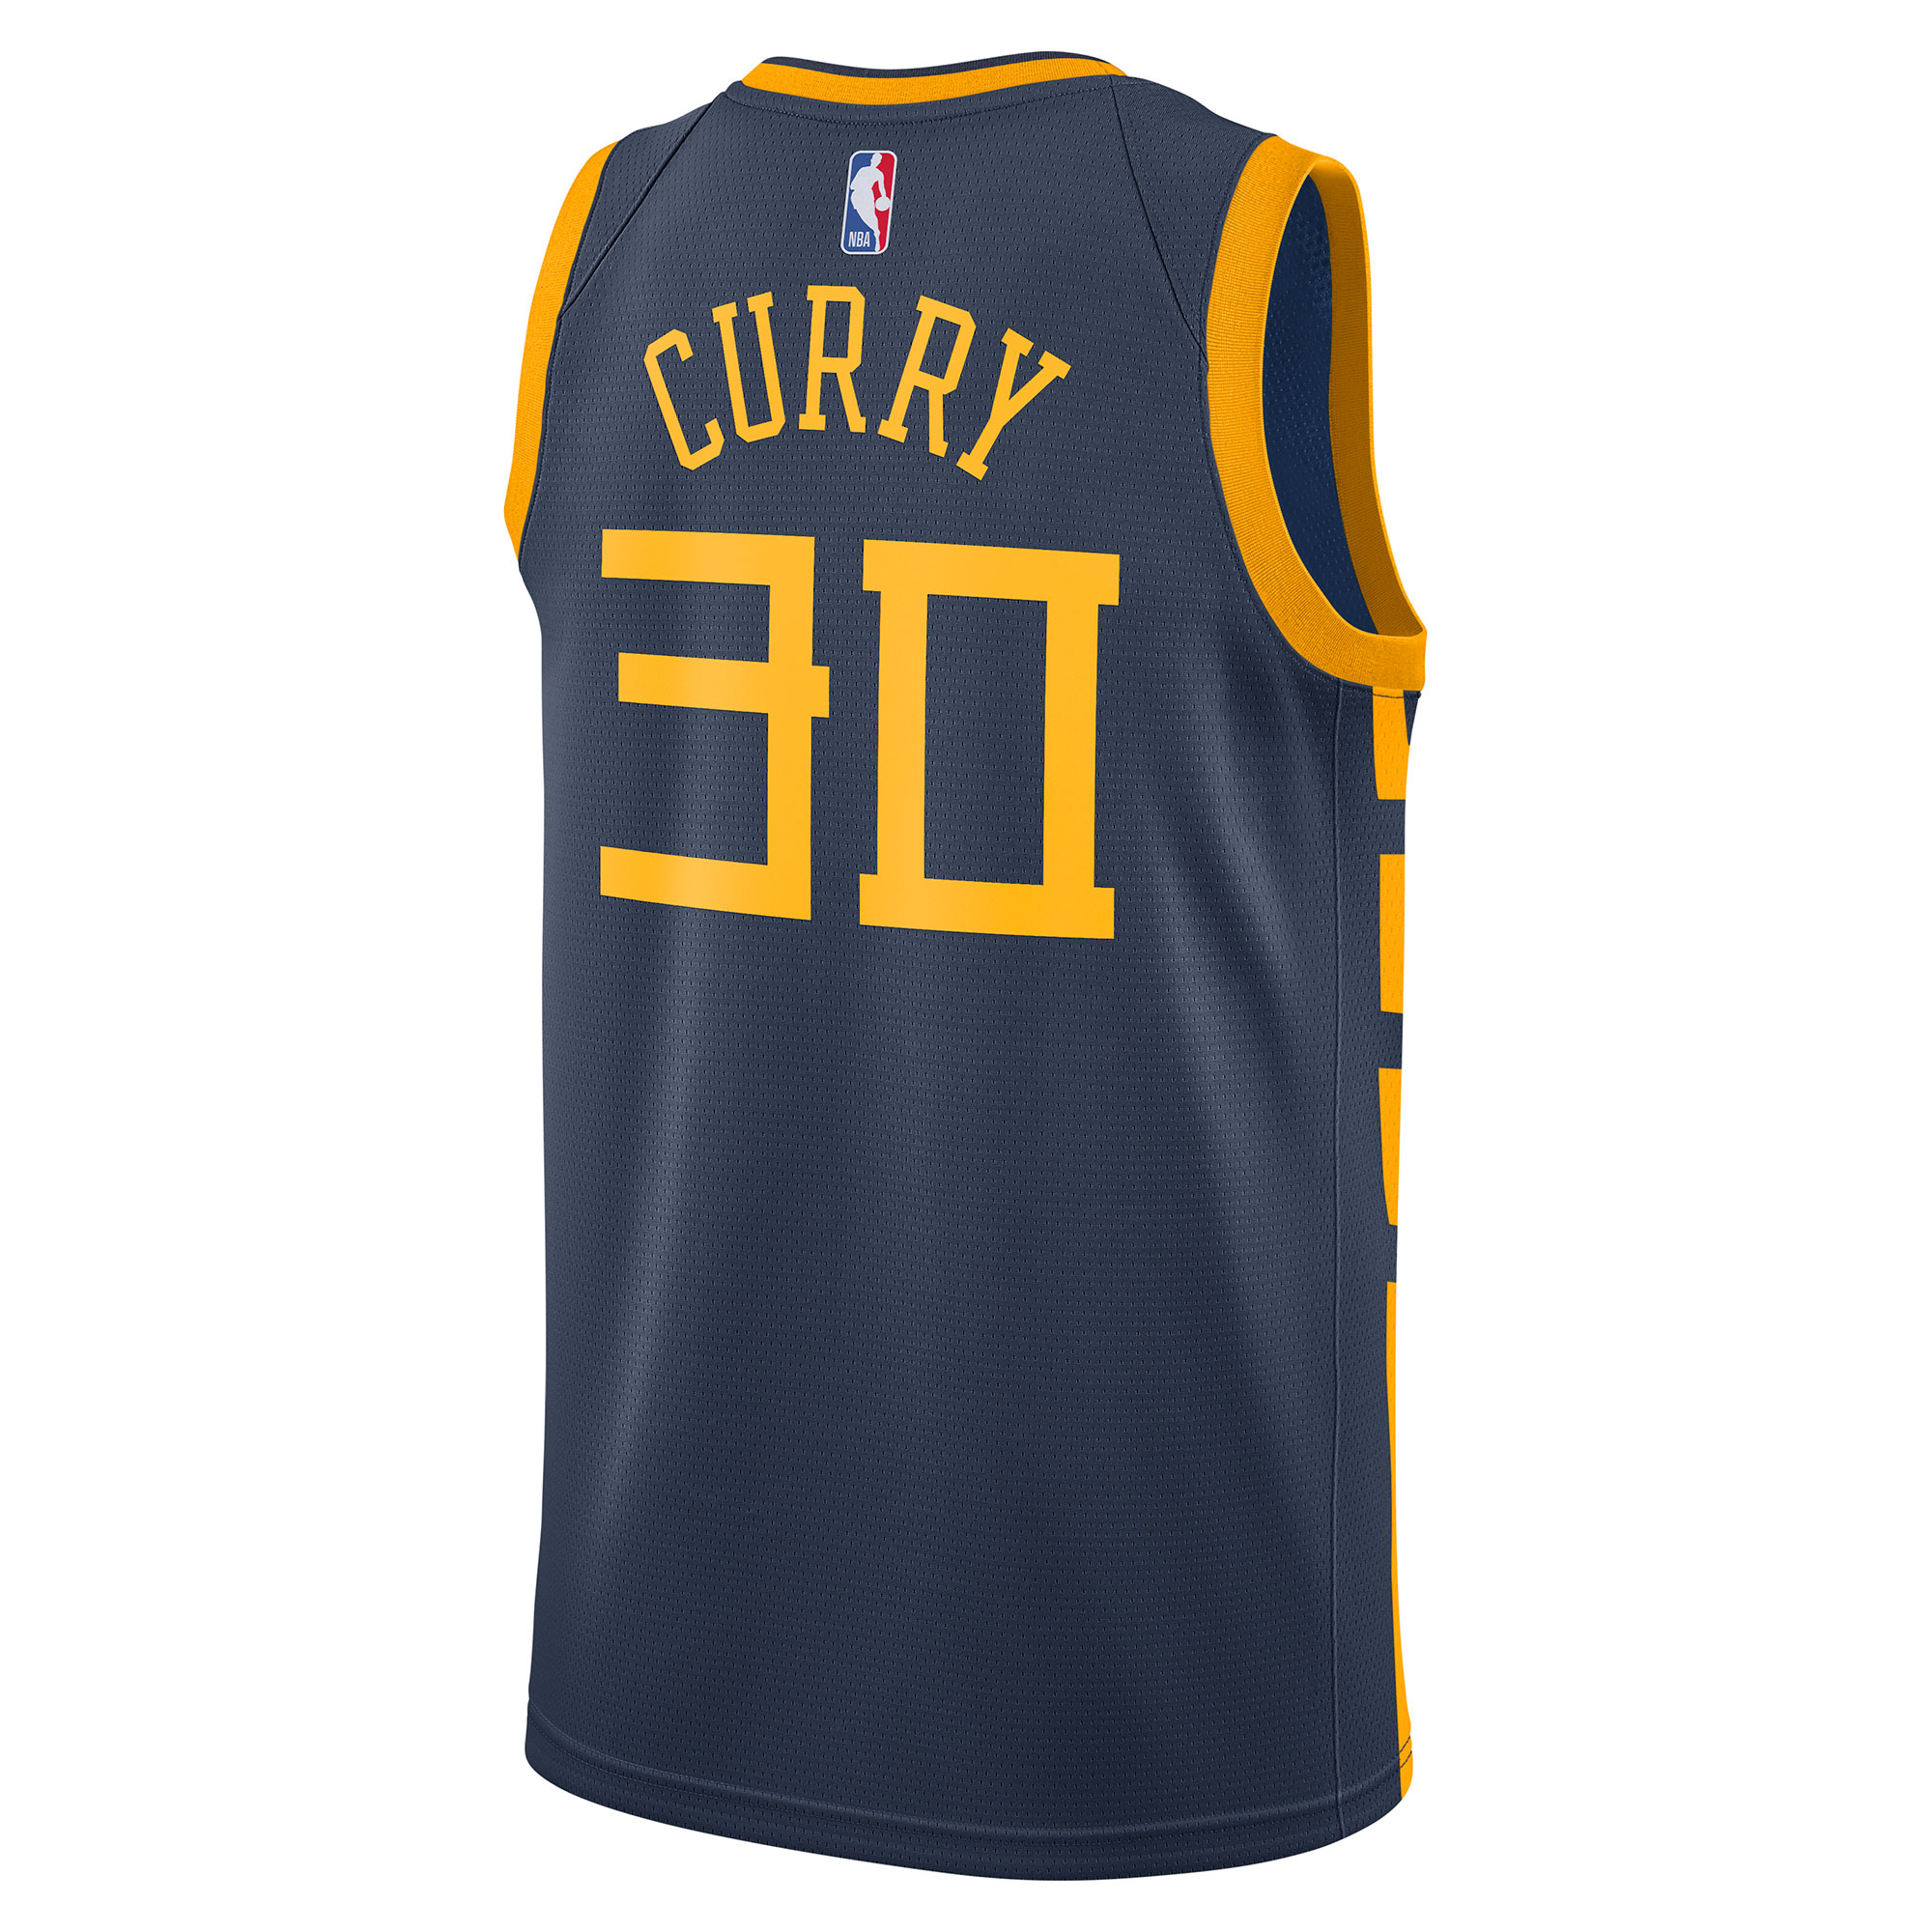 klay thompson chinese heritage jersey